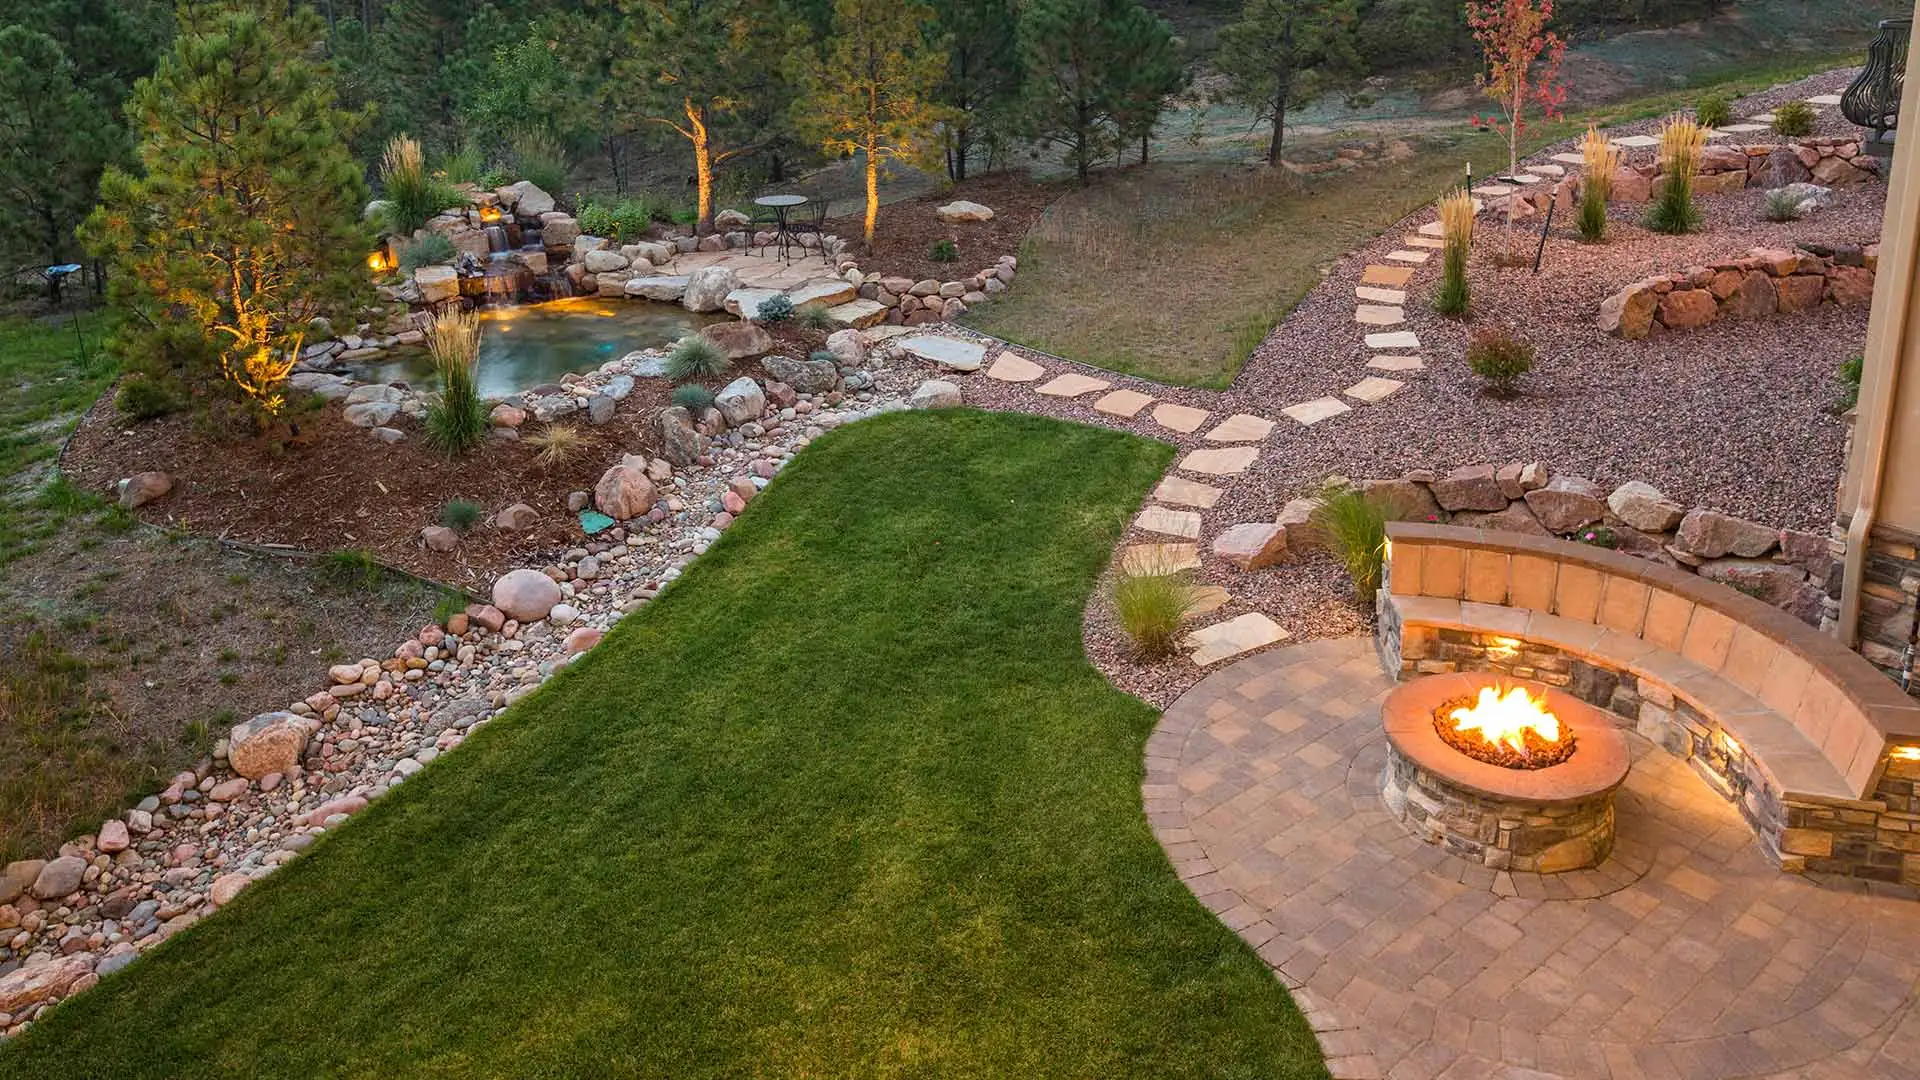 This fire pit in Millstadt, IL will provide enjoyment for the homeowners.